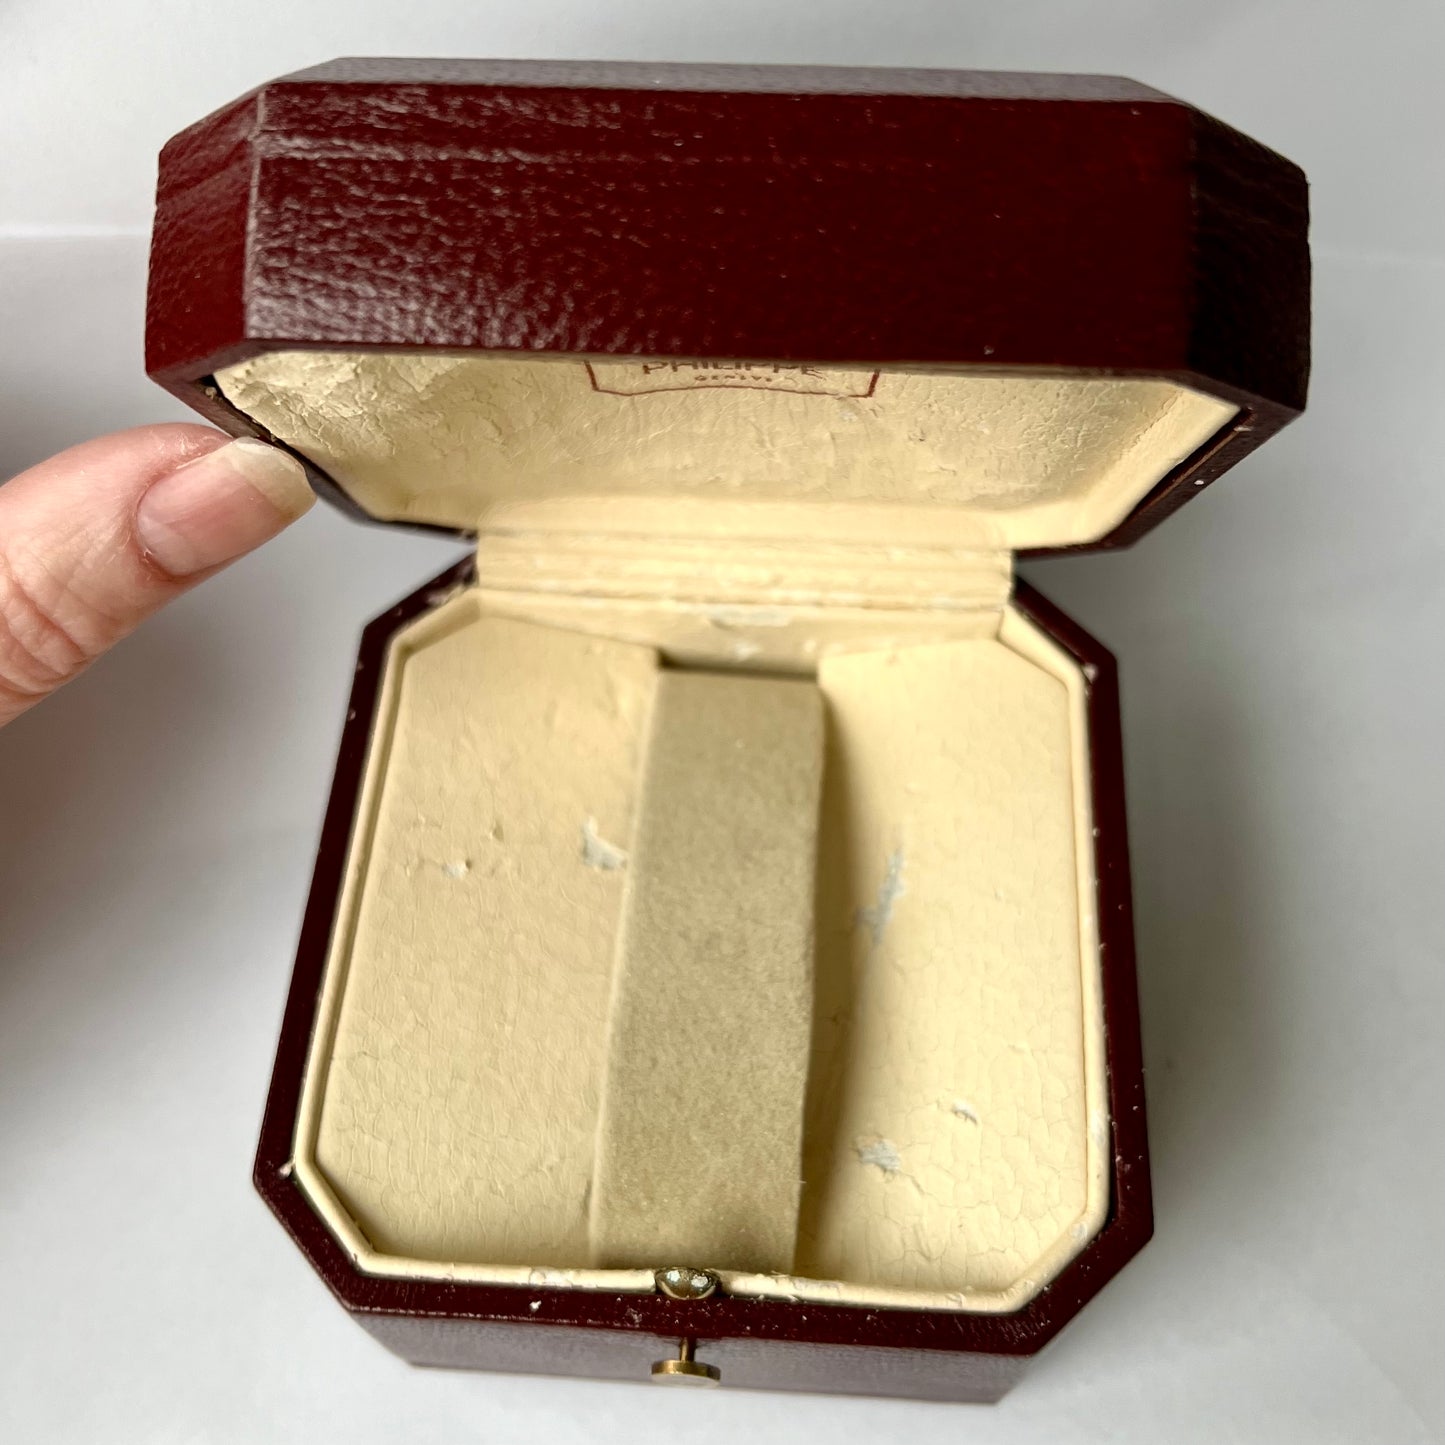 PATEK PHILIPPE Box + Outer Box 4.20x4.20x2.90 inches